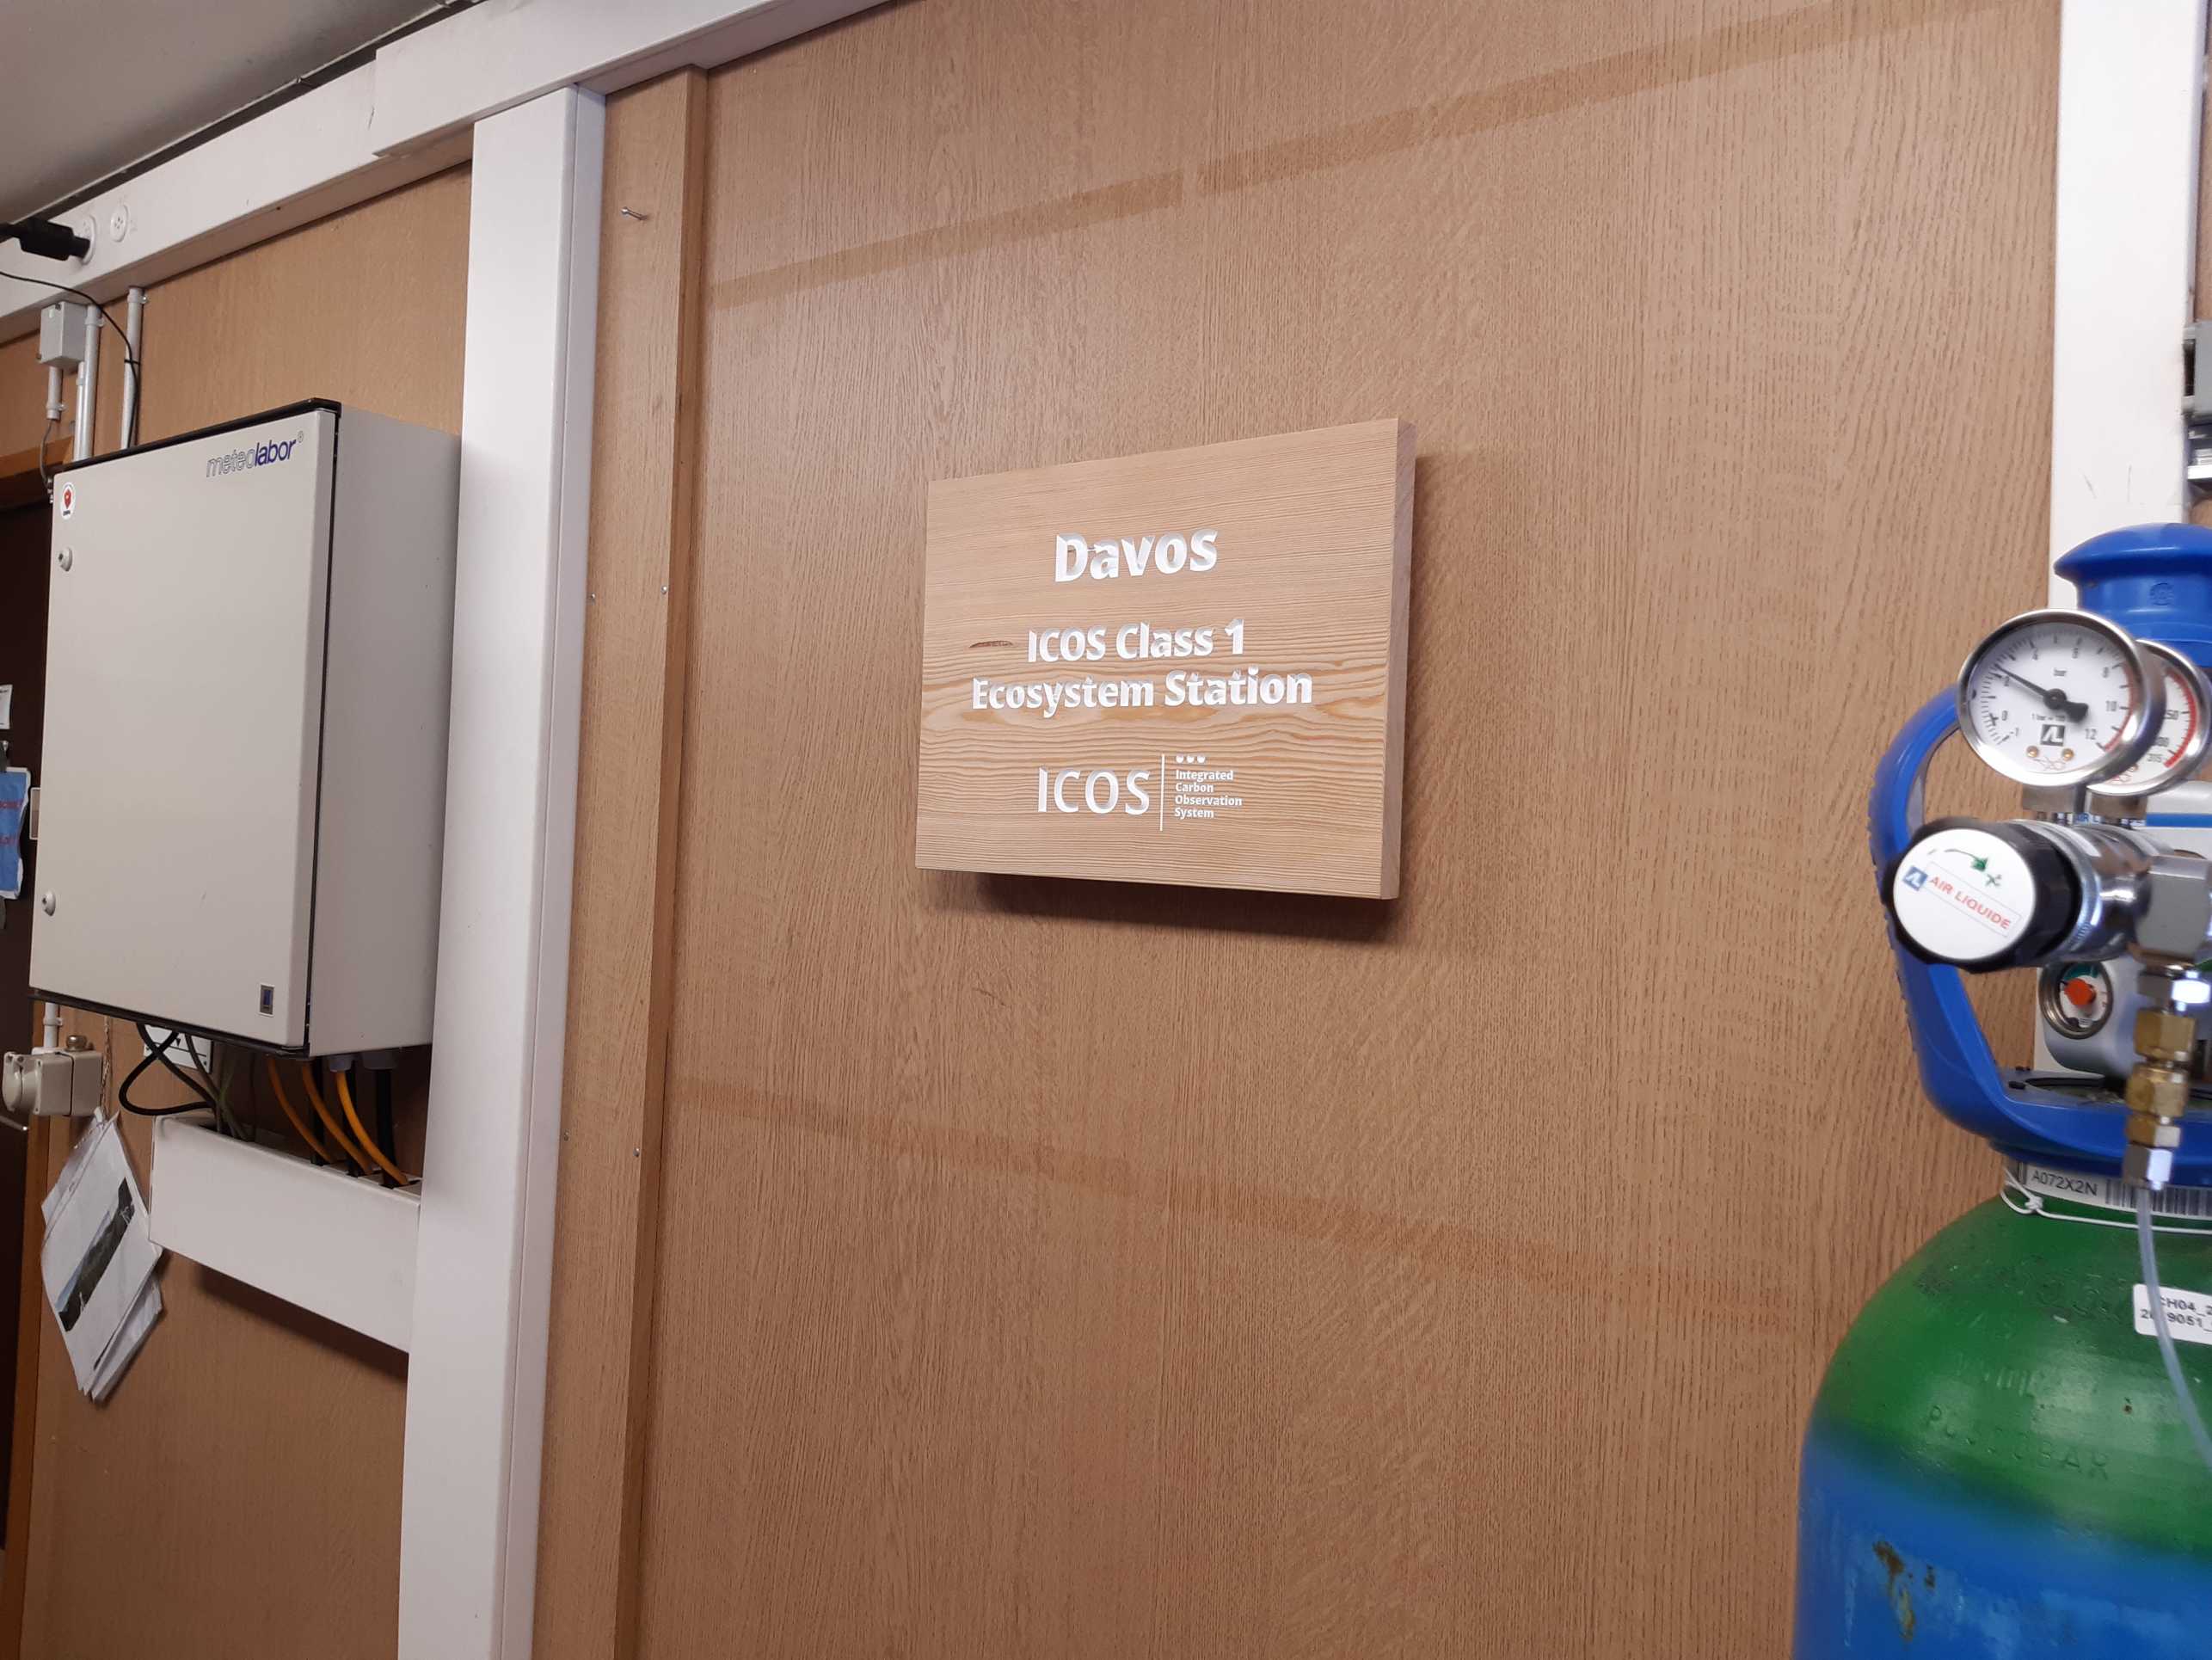 Wooden board saying "Davos ICOS Class 1 Ecosystem Station"